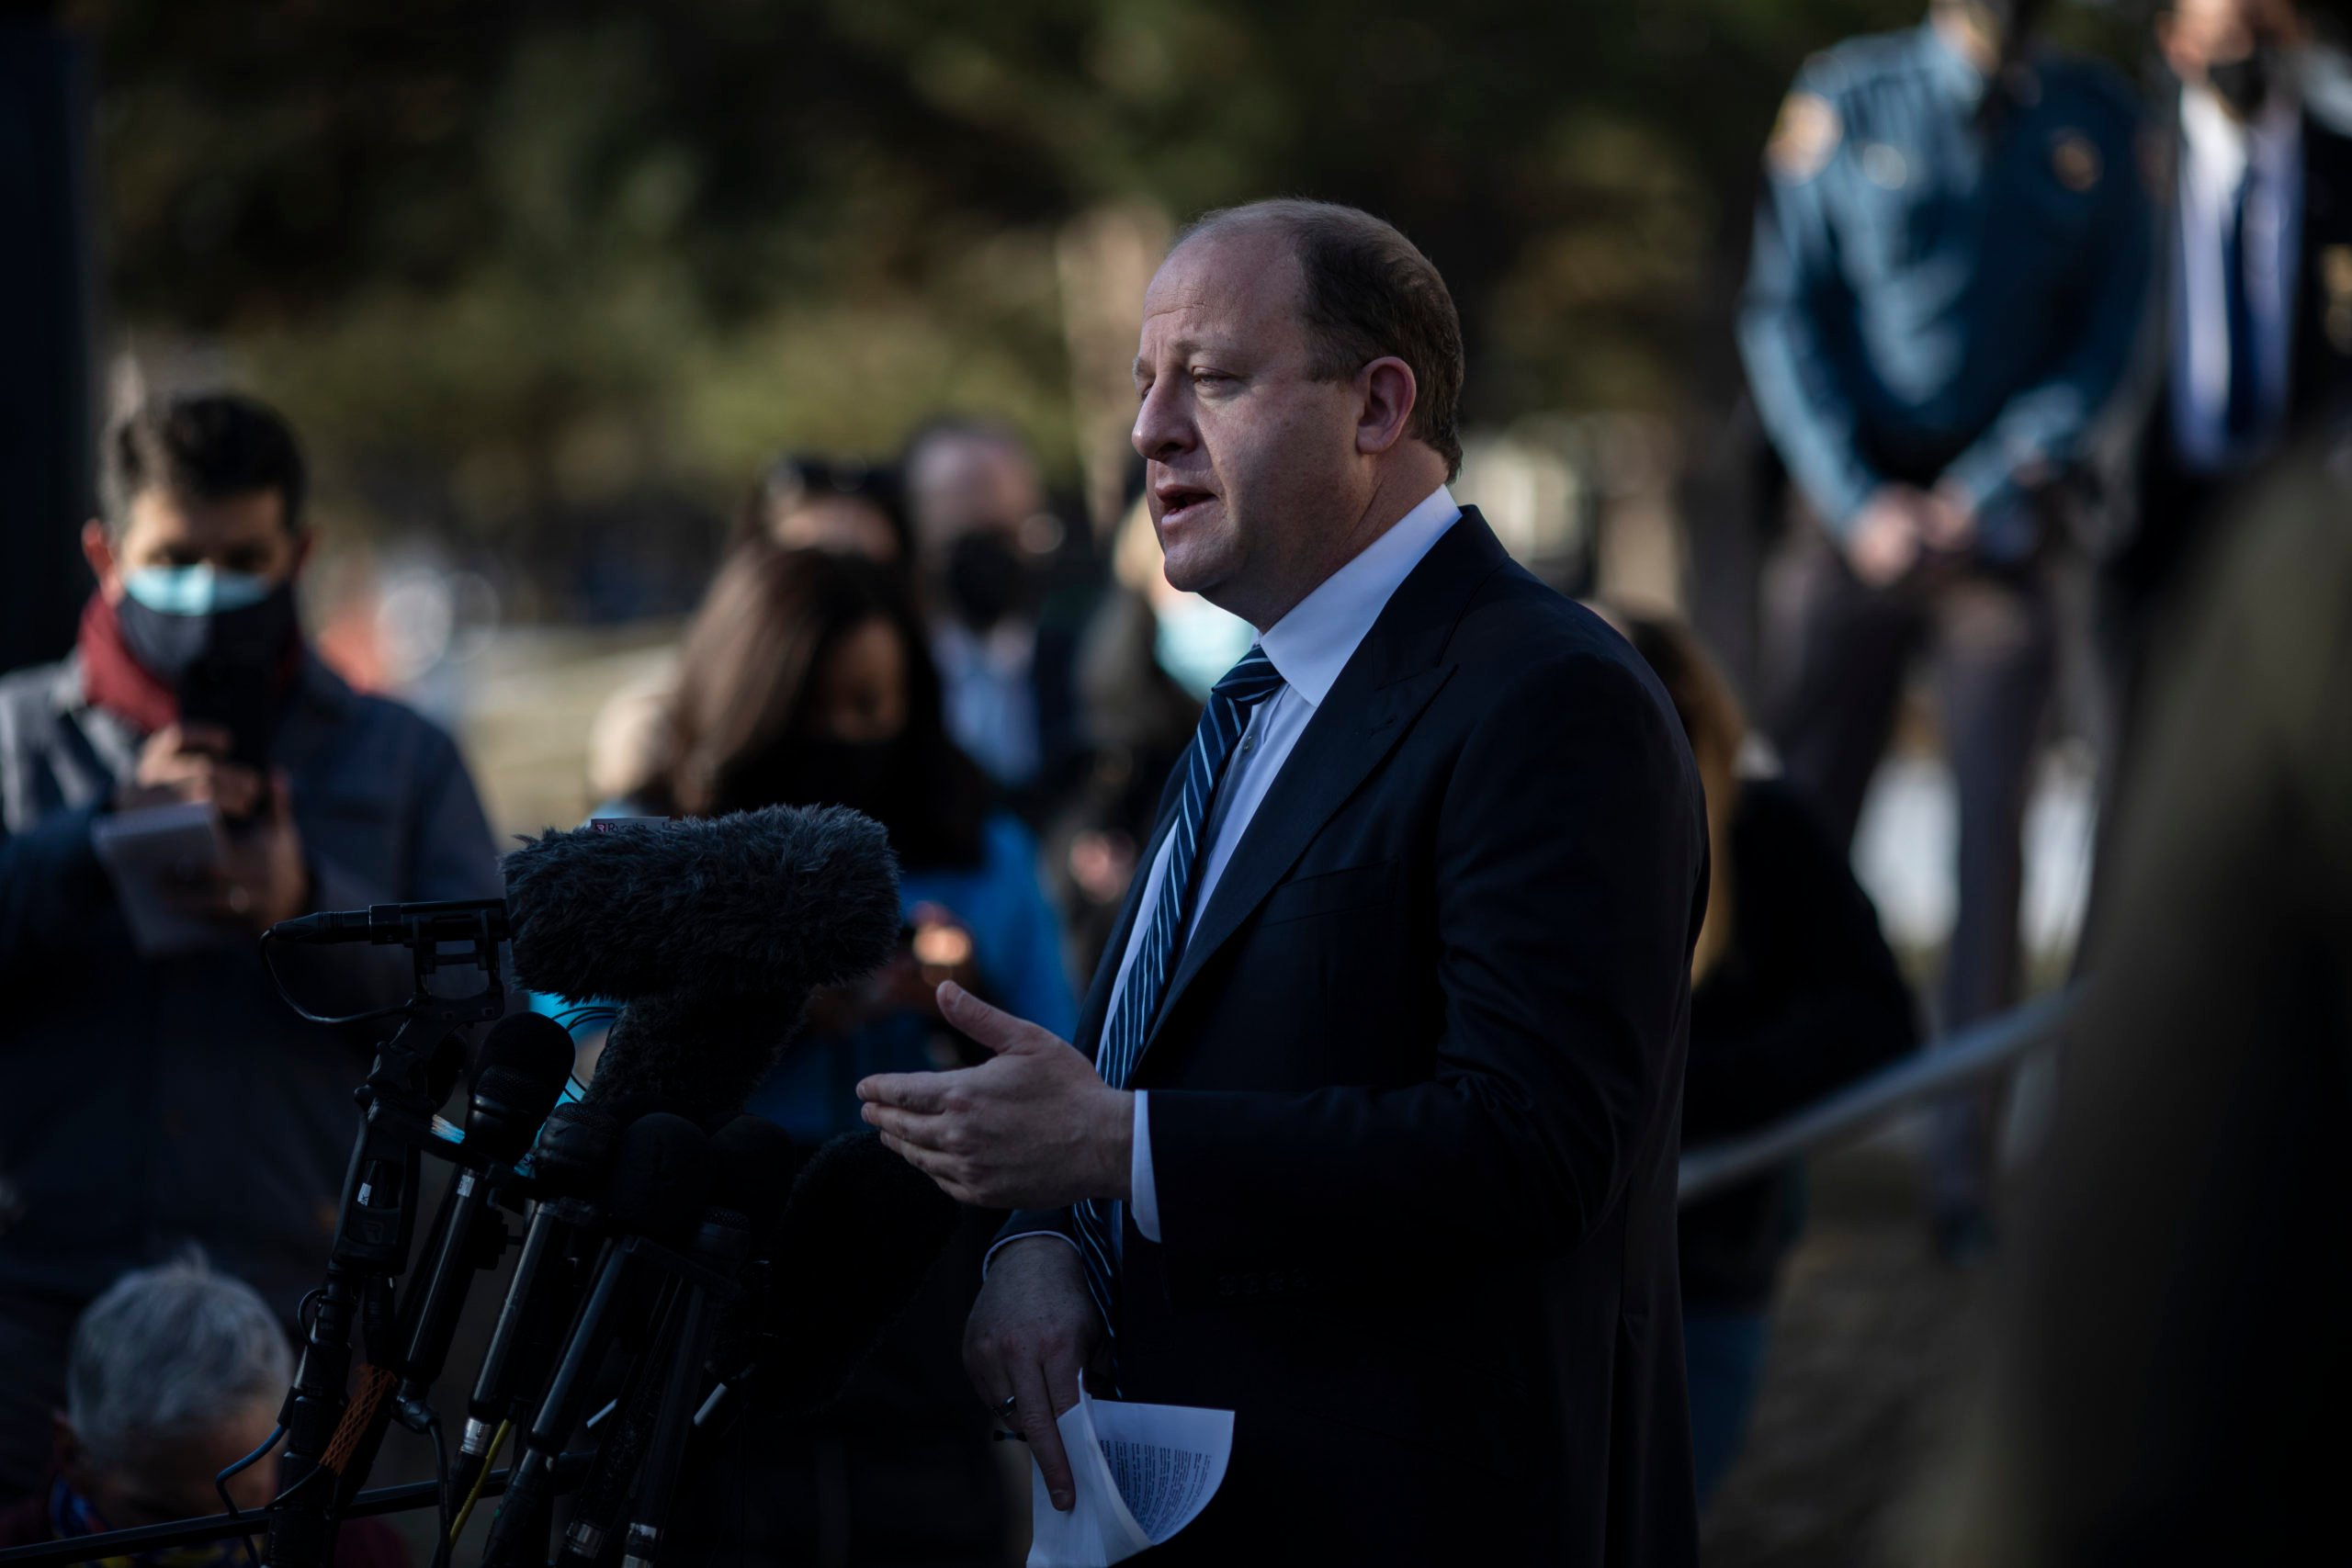 BOULDER, CO - MARCH 23: Colorado Governor Jared Polis speaks at a press conference the morning after a gunman opened fire at a King Sooper's grocery store on Monday on March 23, 2021 in Boulder, Colorado. Ten people were killed in the attack. (Photo by Chet Strange/Getty Images)